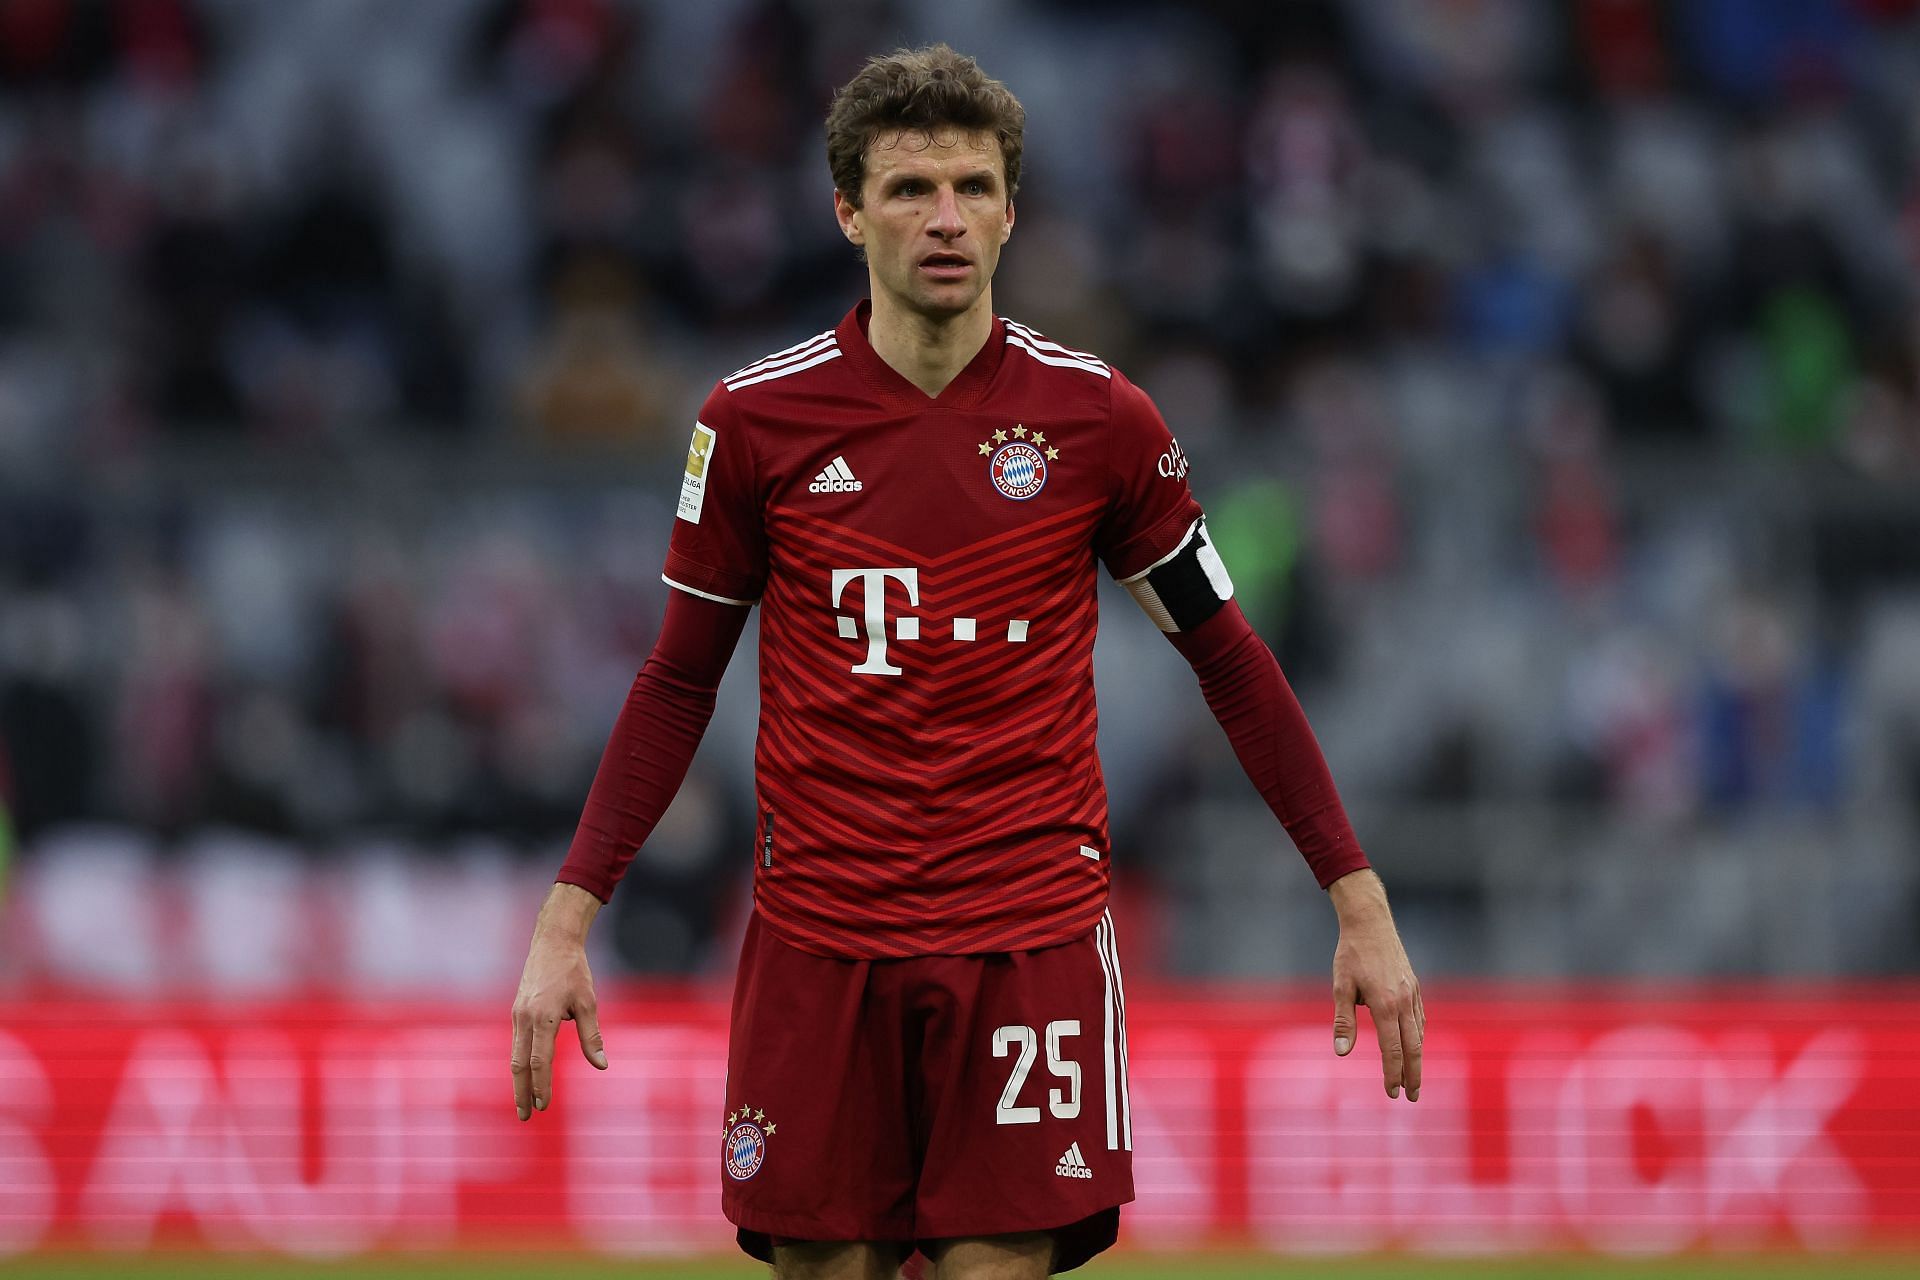 Thomas Muller is a bonafide Bayern Munich legend and two-time UEFA Champions League winner.